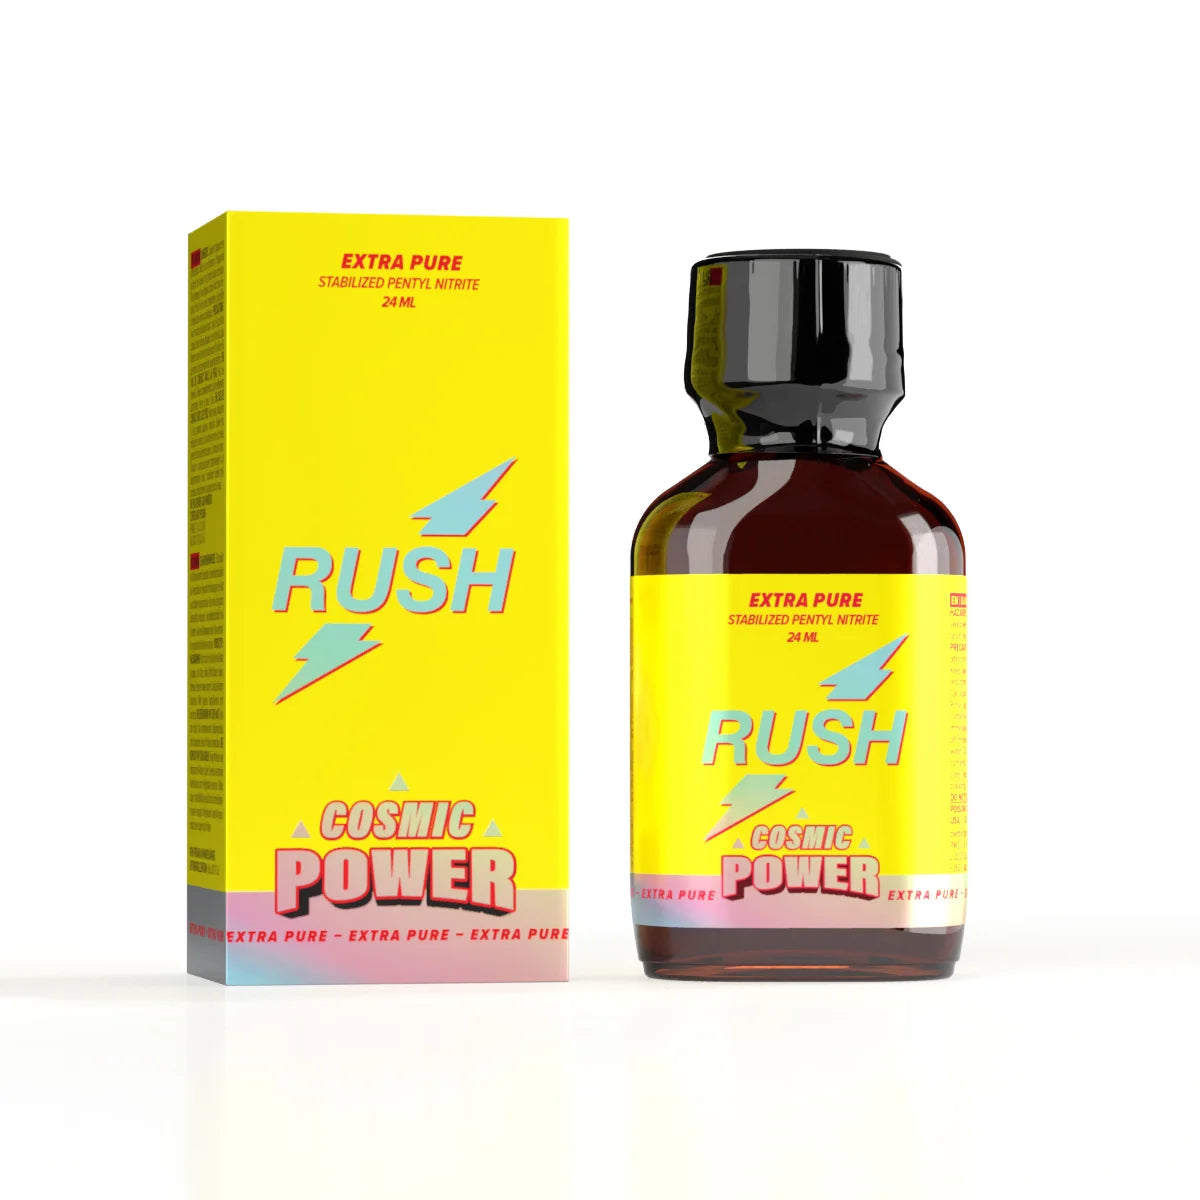 A product photo of Rush Cosmic Power poppers.